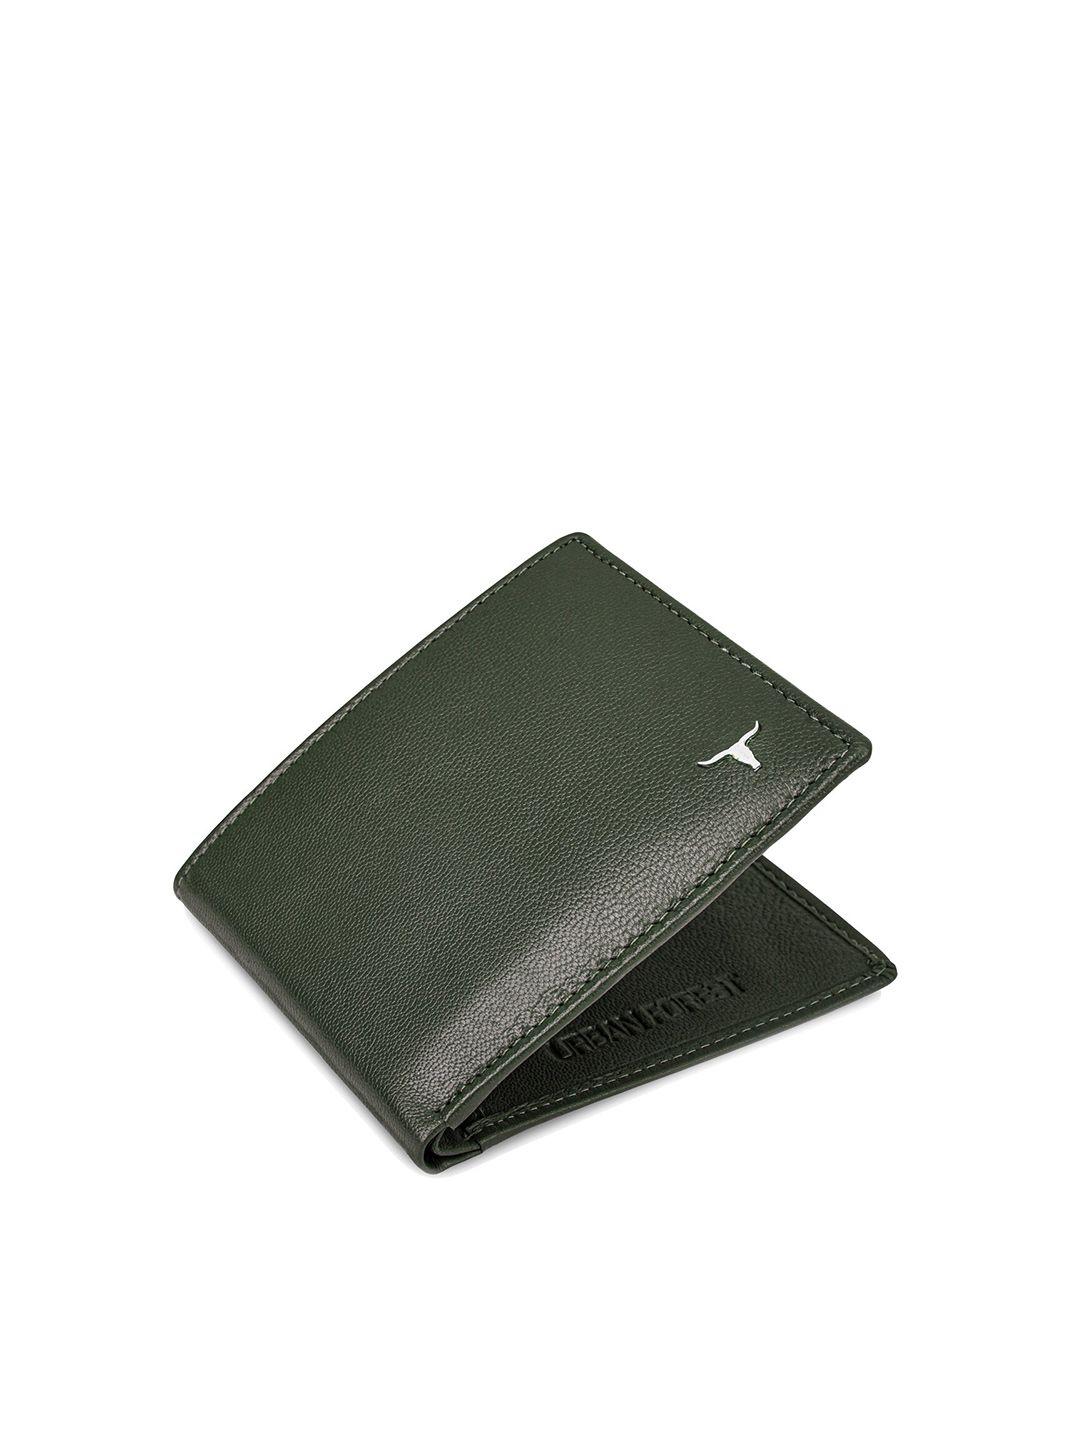 urban forest men leather rfid two fold wallet